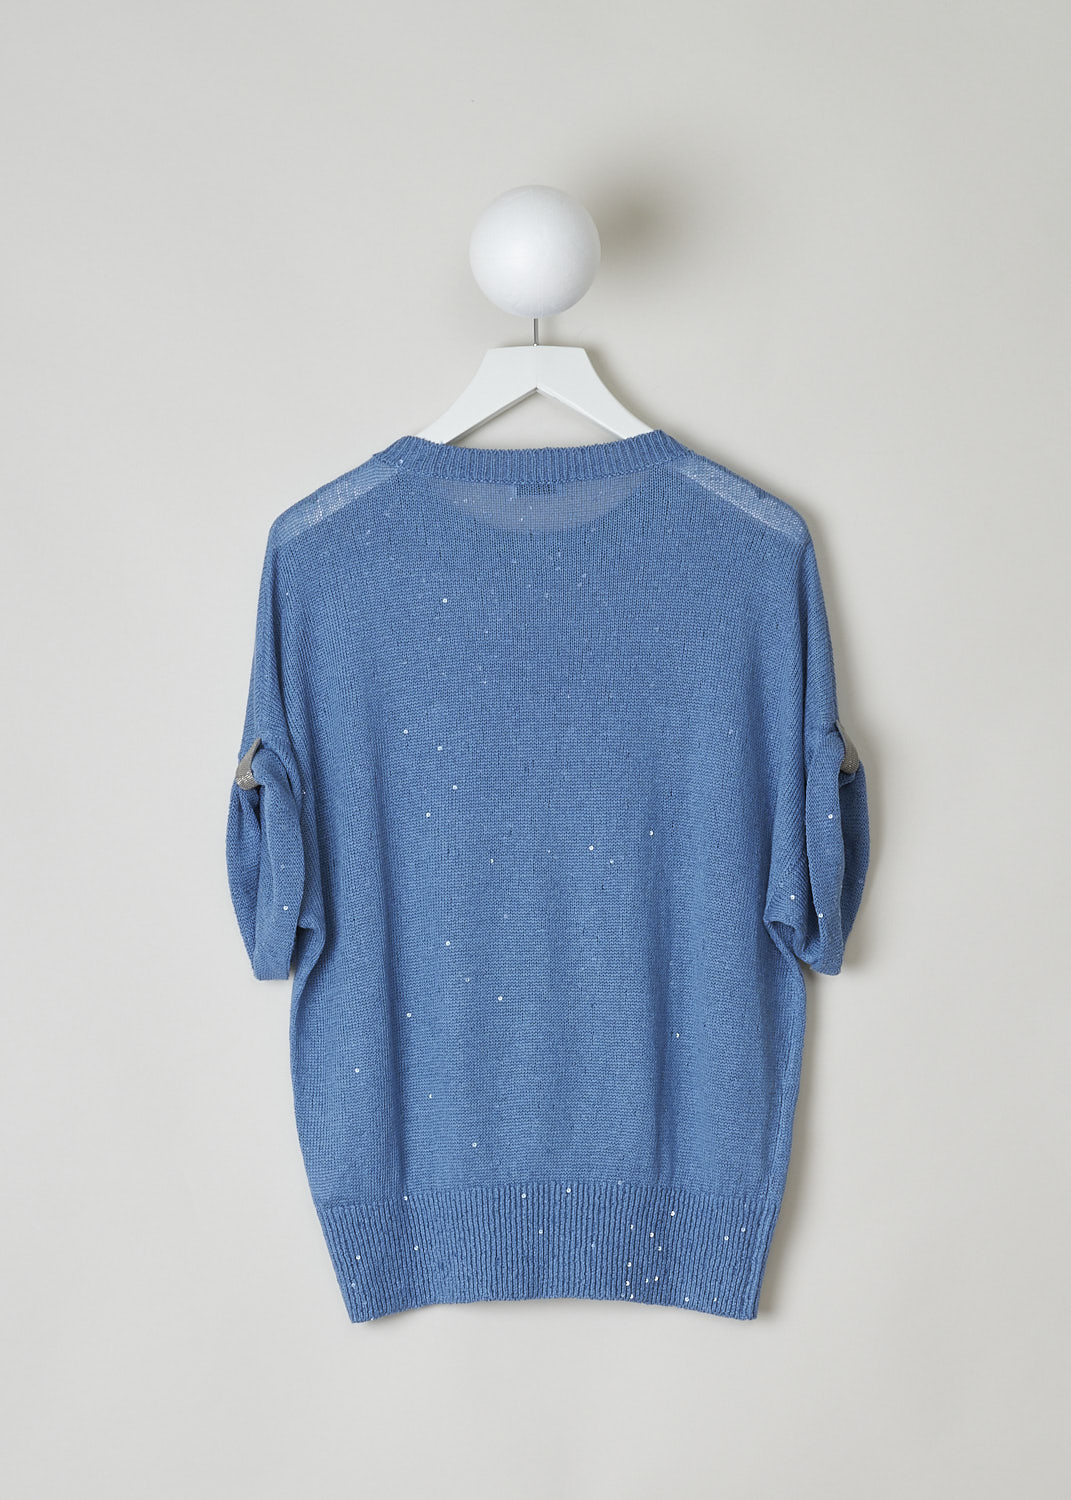 BRUNELLO CUCINELLI, LIGHT BLUE SWEATER WITH SEQUINS, M10552300_C9402, Blue, Back, This short sleeve light blue sweater has sequins sewn-in throughout. The round neckline, cuffs and hemline have a ribbed finish. The short sleeves are folded and held in place with a monilli decorated strap.
